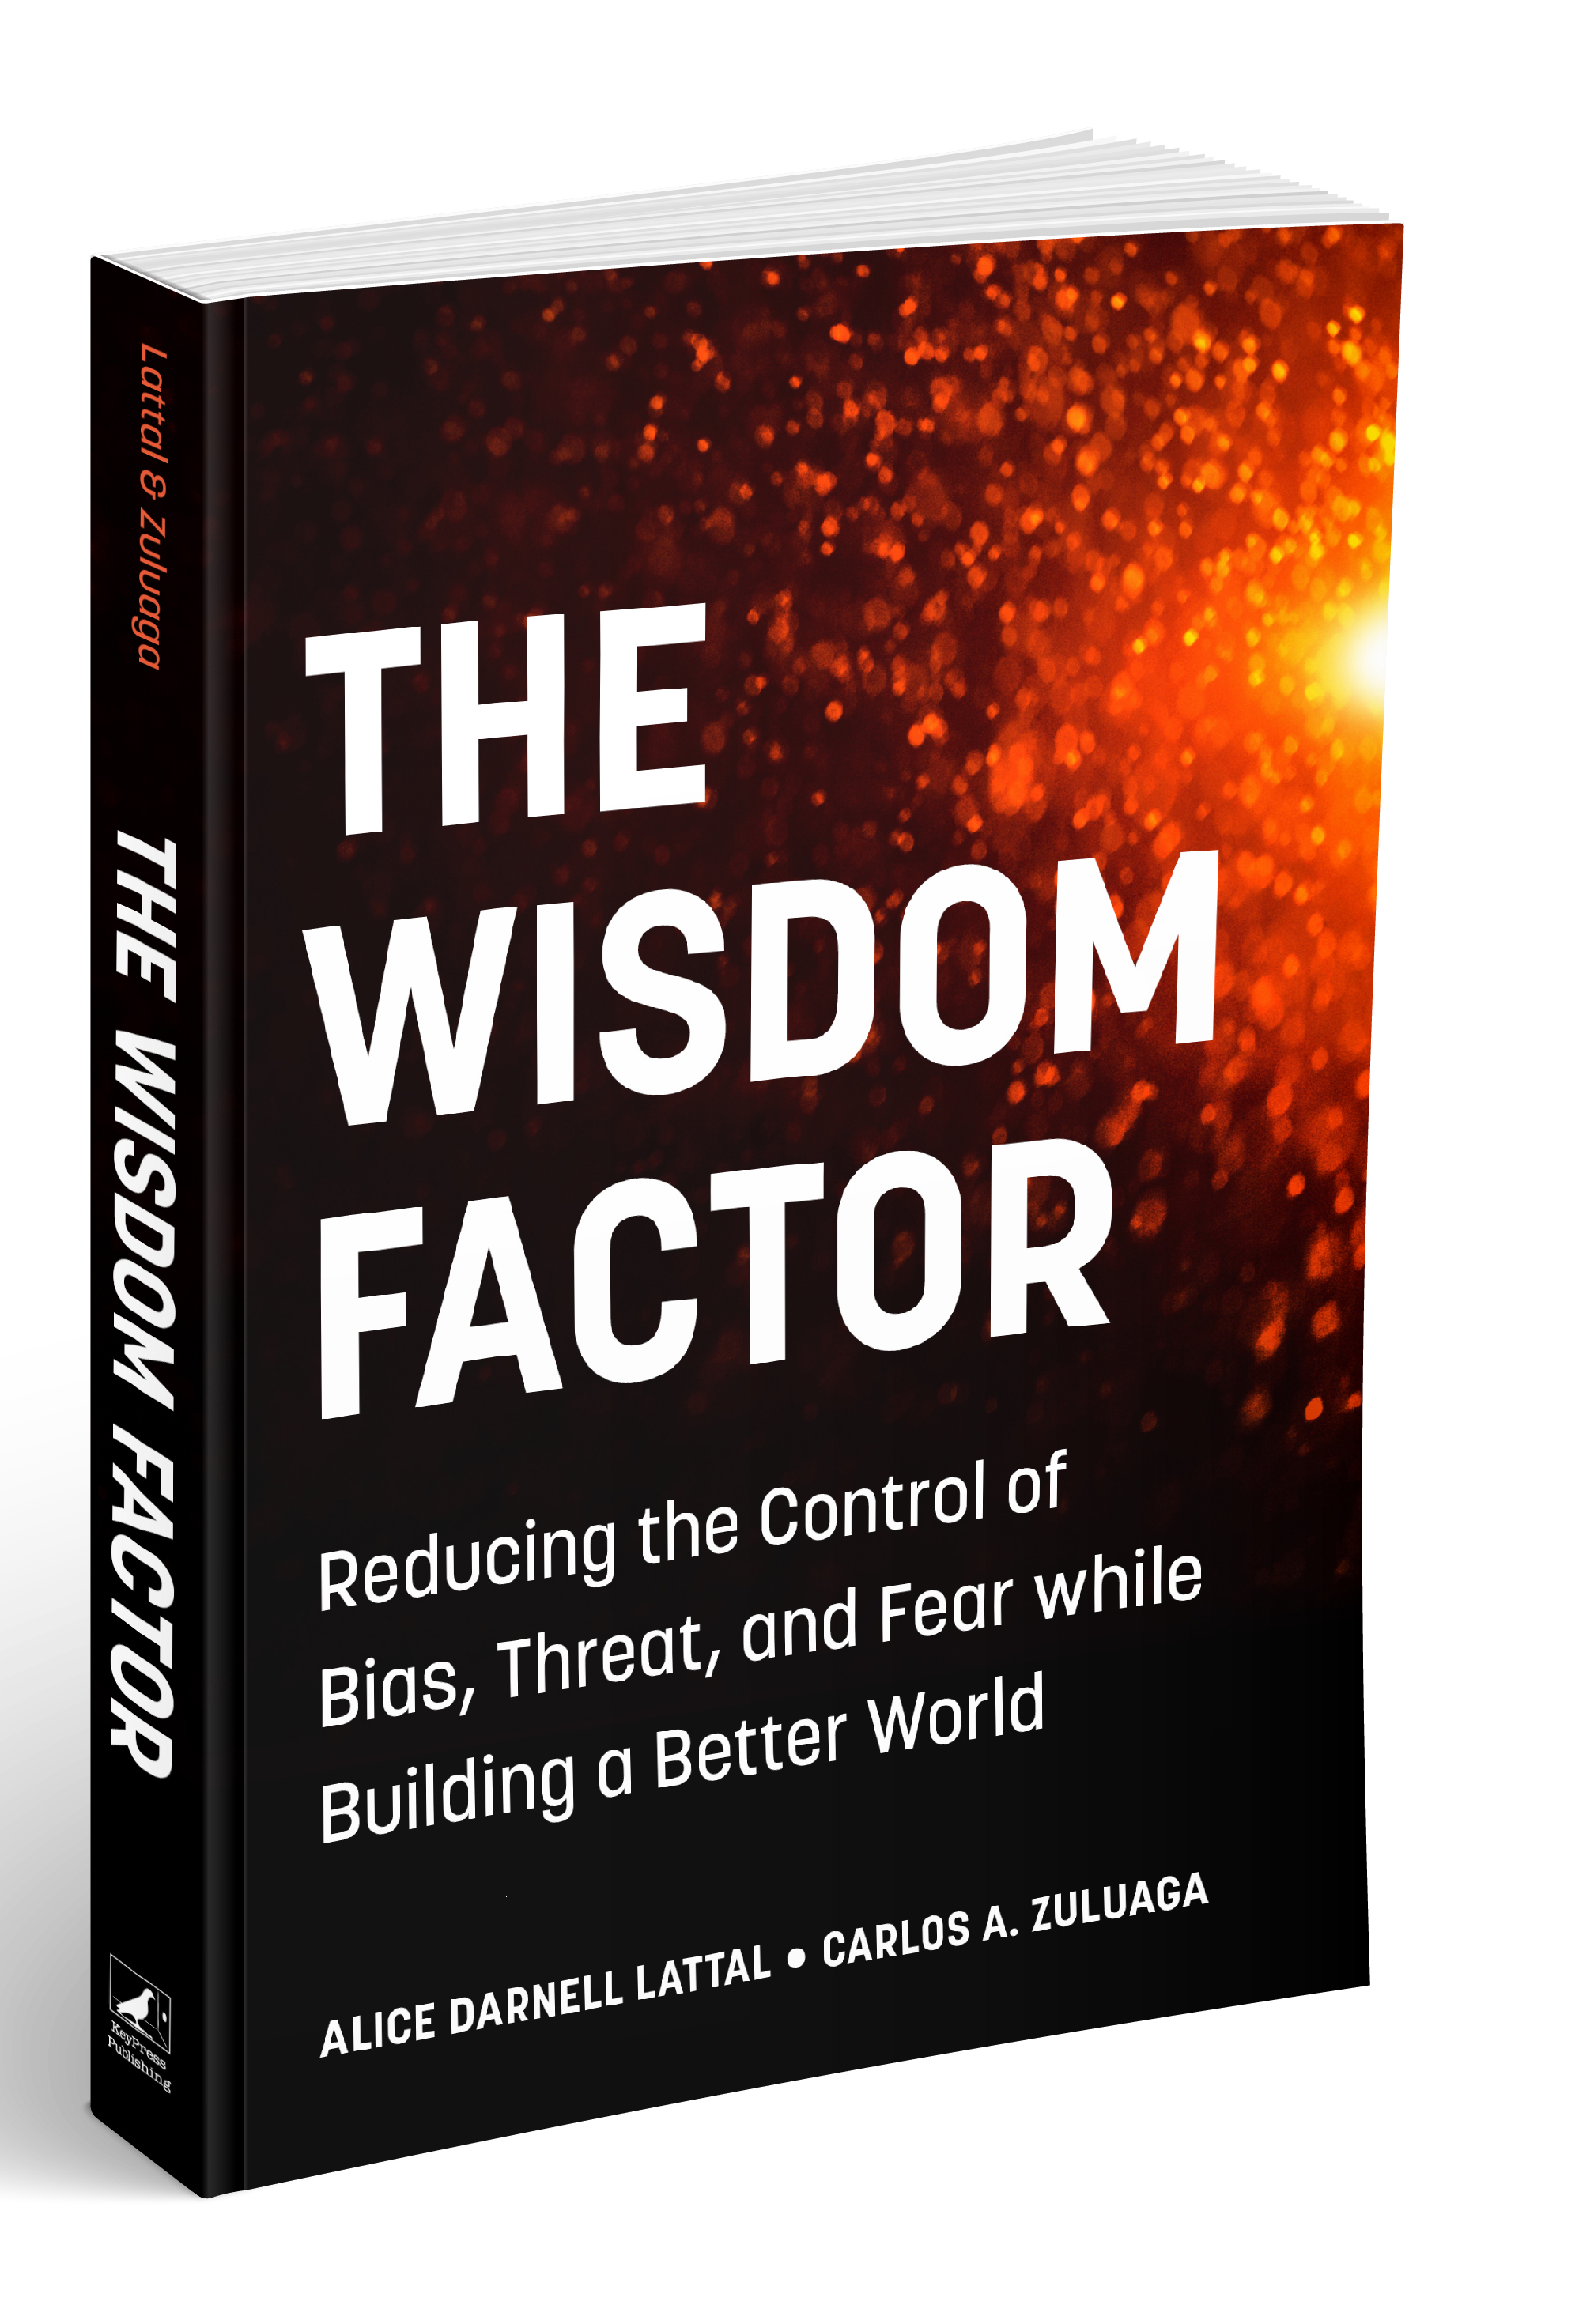 The cover of the book "The Wisdom Factor".